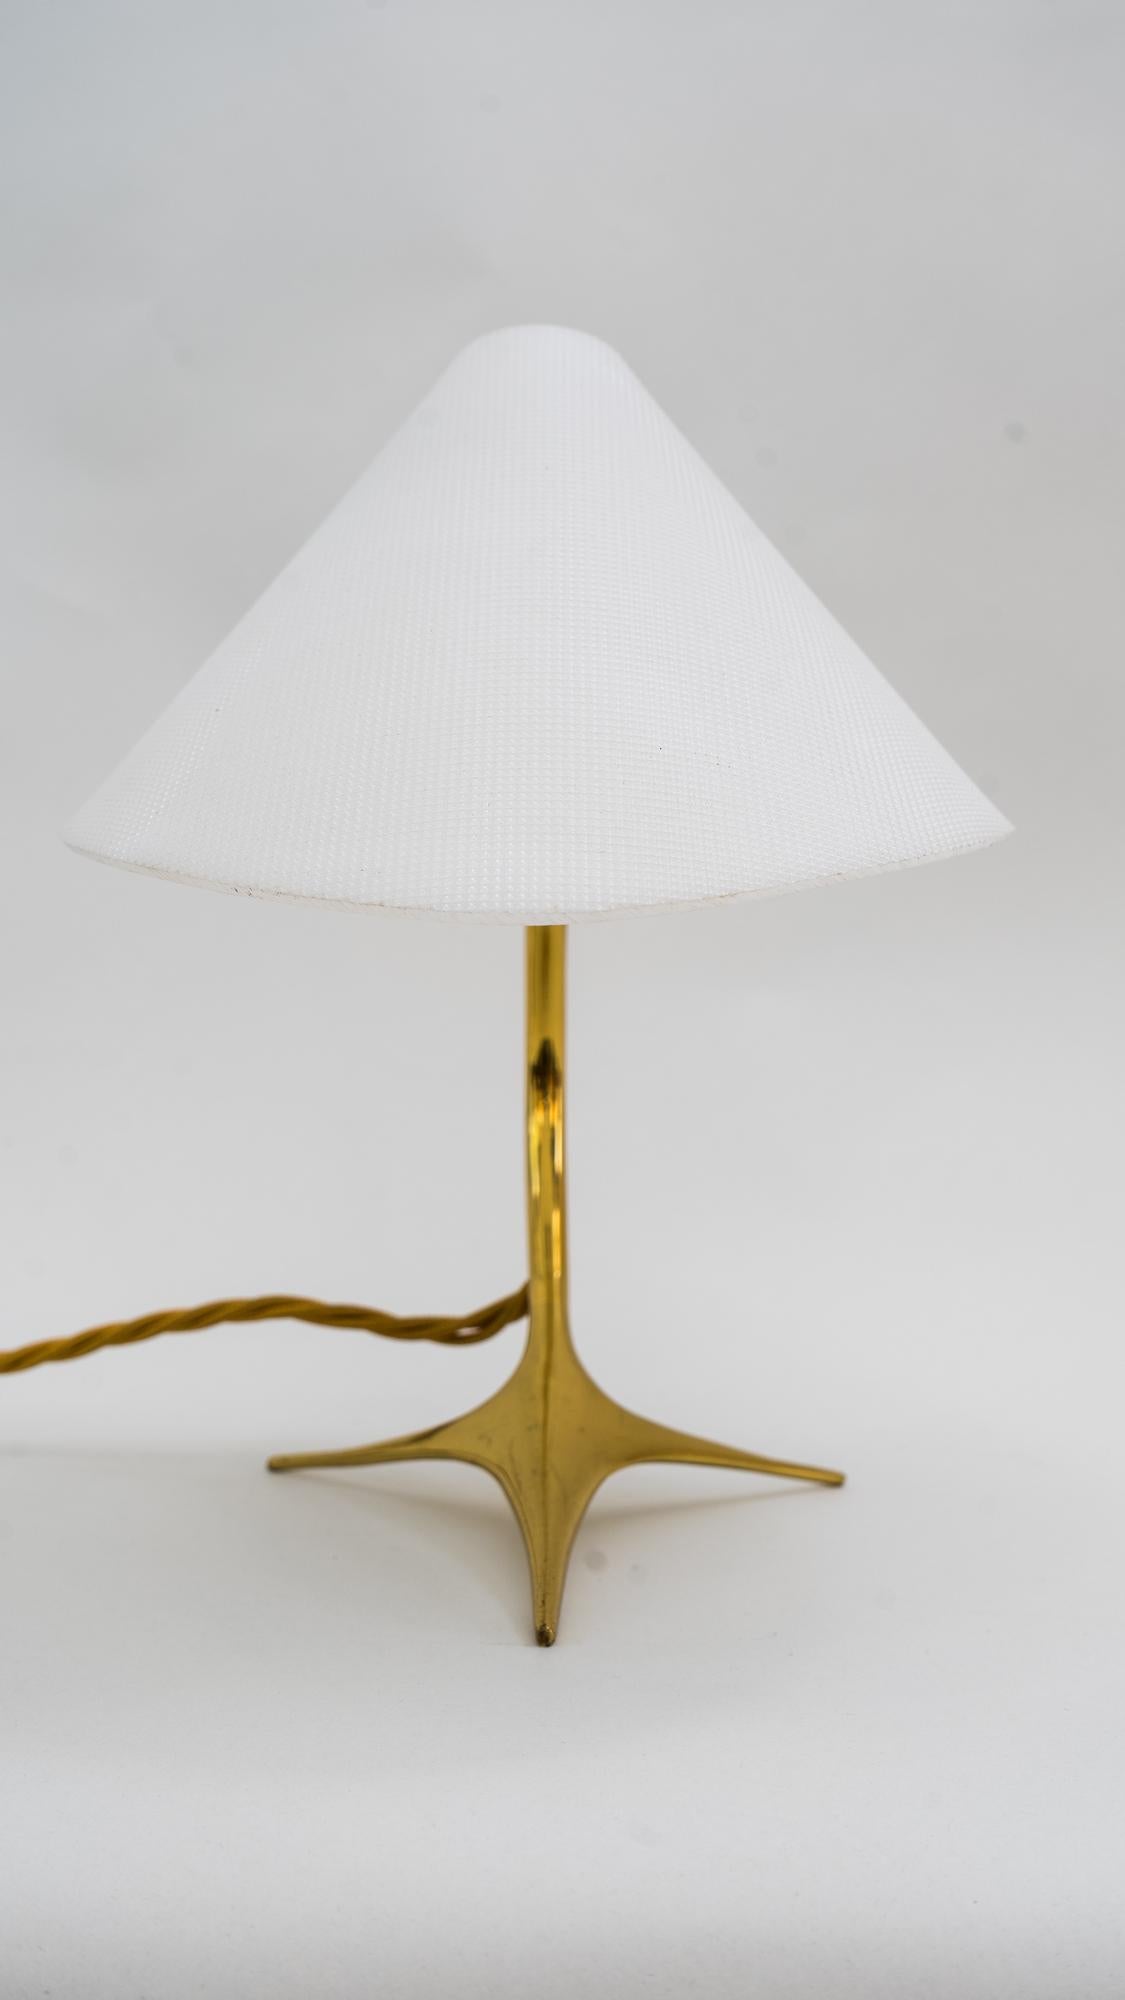 Rupert Nikoll table lamp, Vienna, circa 1950s (the shade is adjustable)
Brass and Lucite
Original condition.